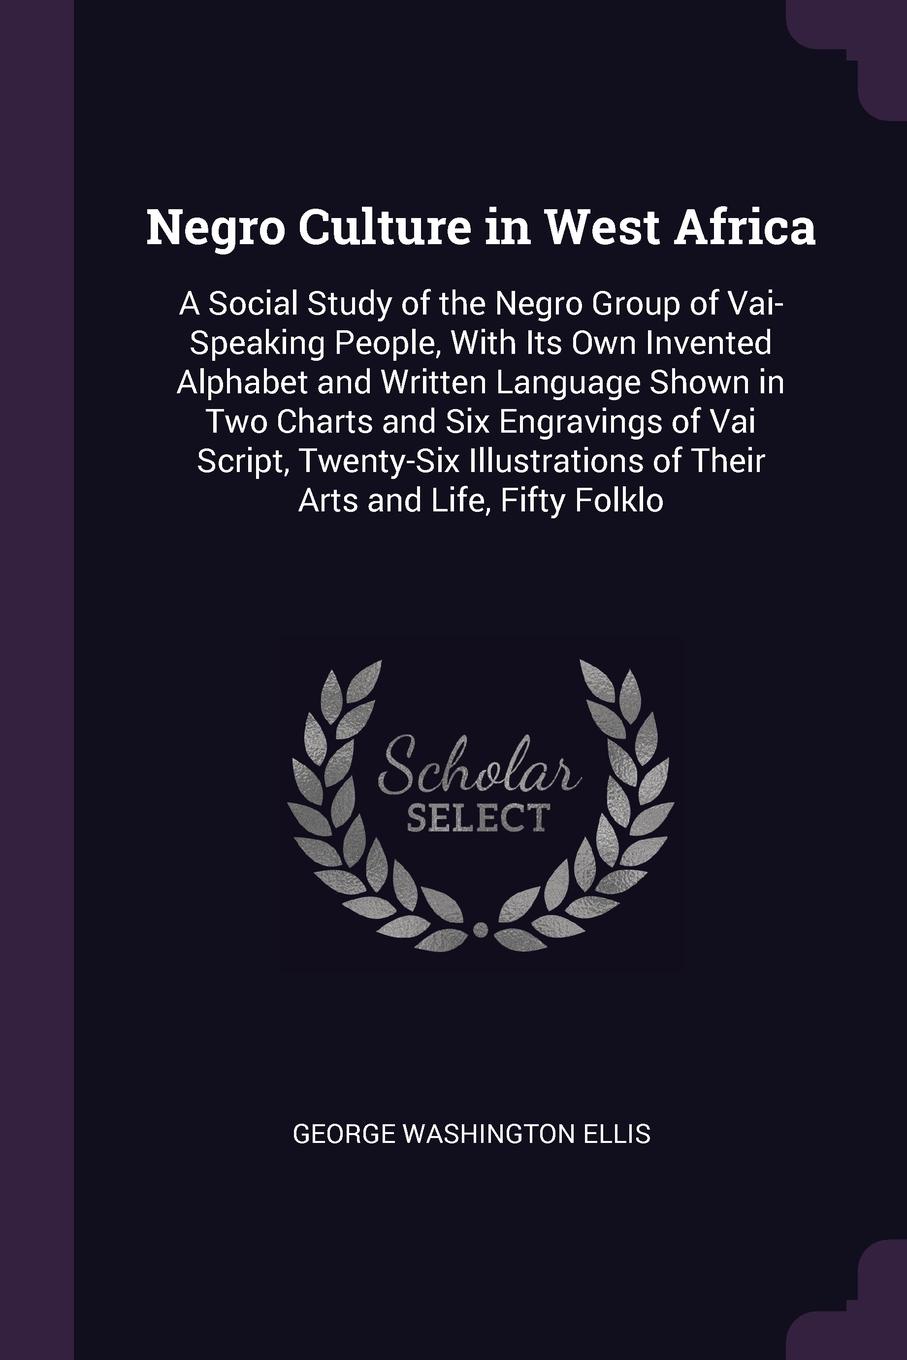 Negro Culture in West Africa. A Social Study of the Negro Group of Vai-Speaking People, With Its Own Invented Alphabet and Written Language Shown in Two Charts and Six Engravings of Vai Script, Twenty-Six Illustrations of Their Arts and Life, Fift...